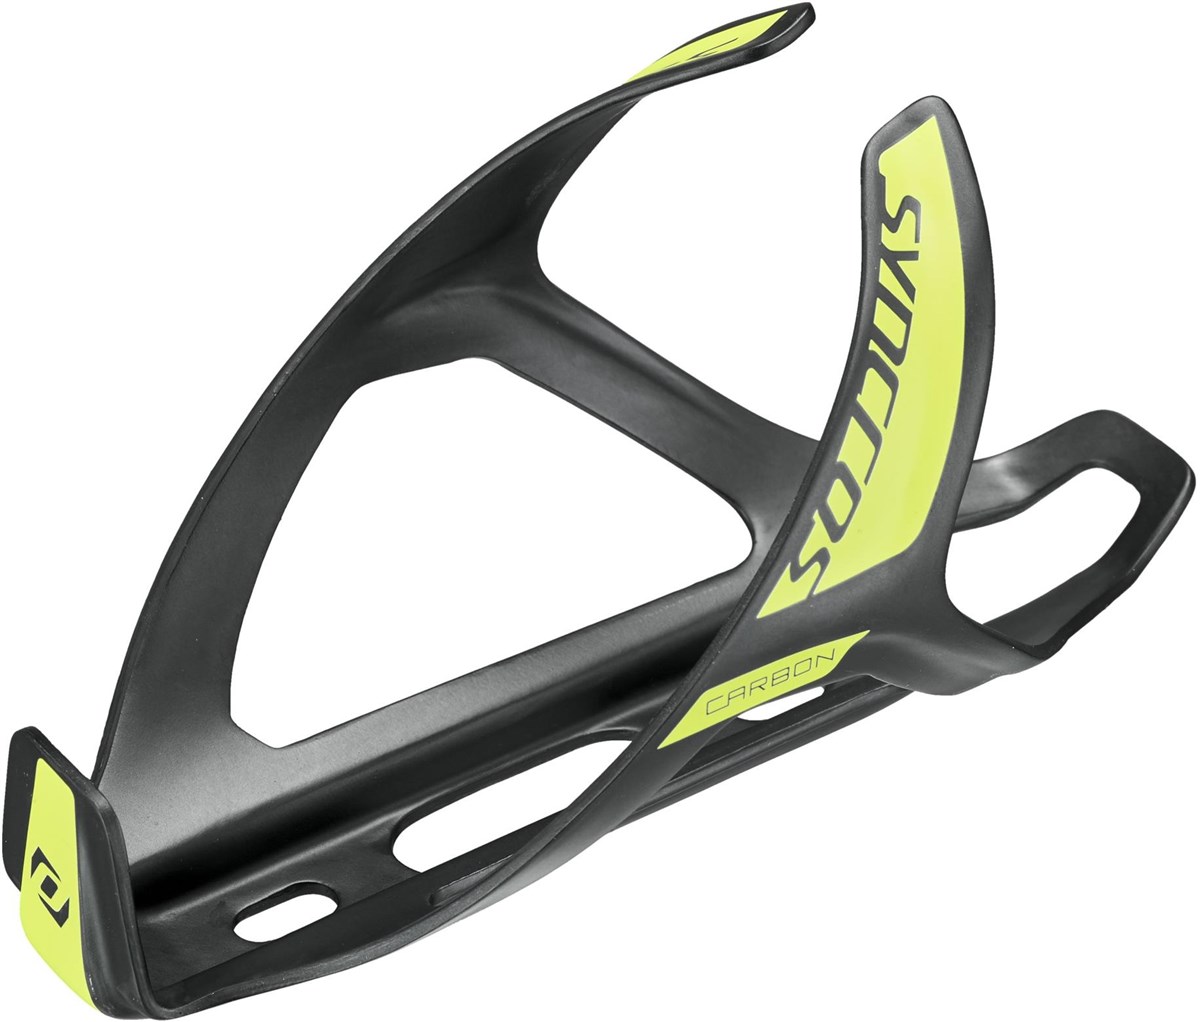 Syncros Carbon 1.0 Bottle Cage product image